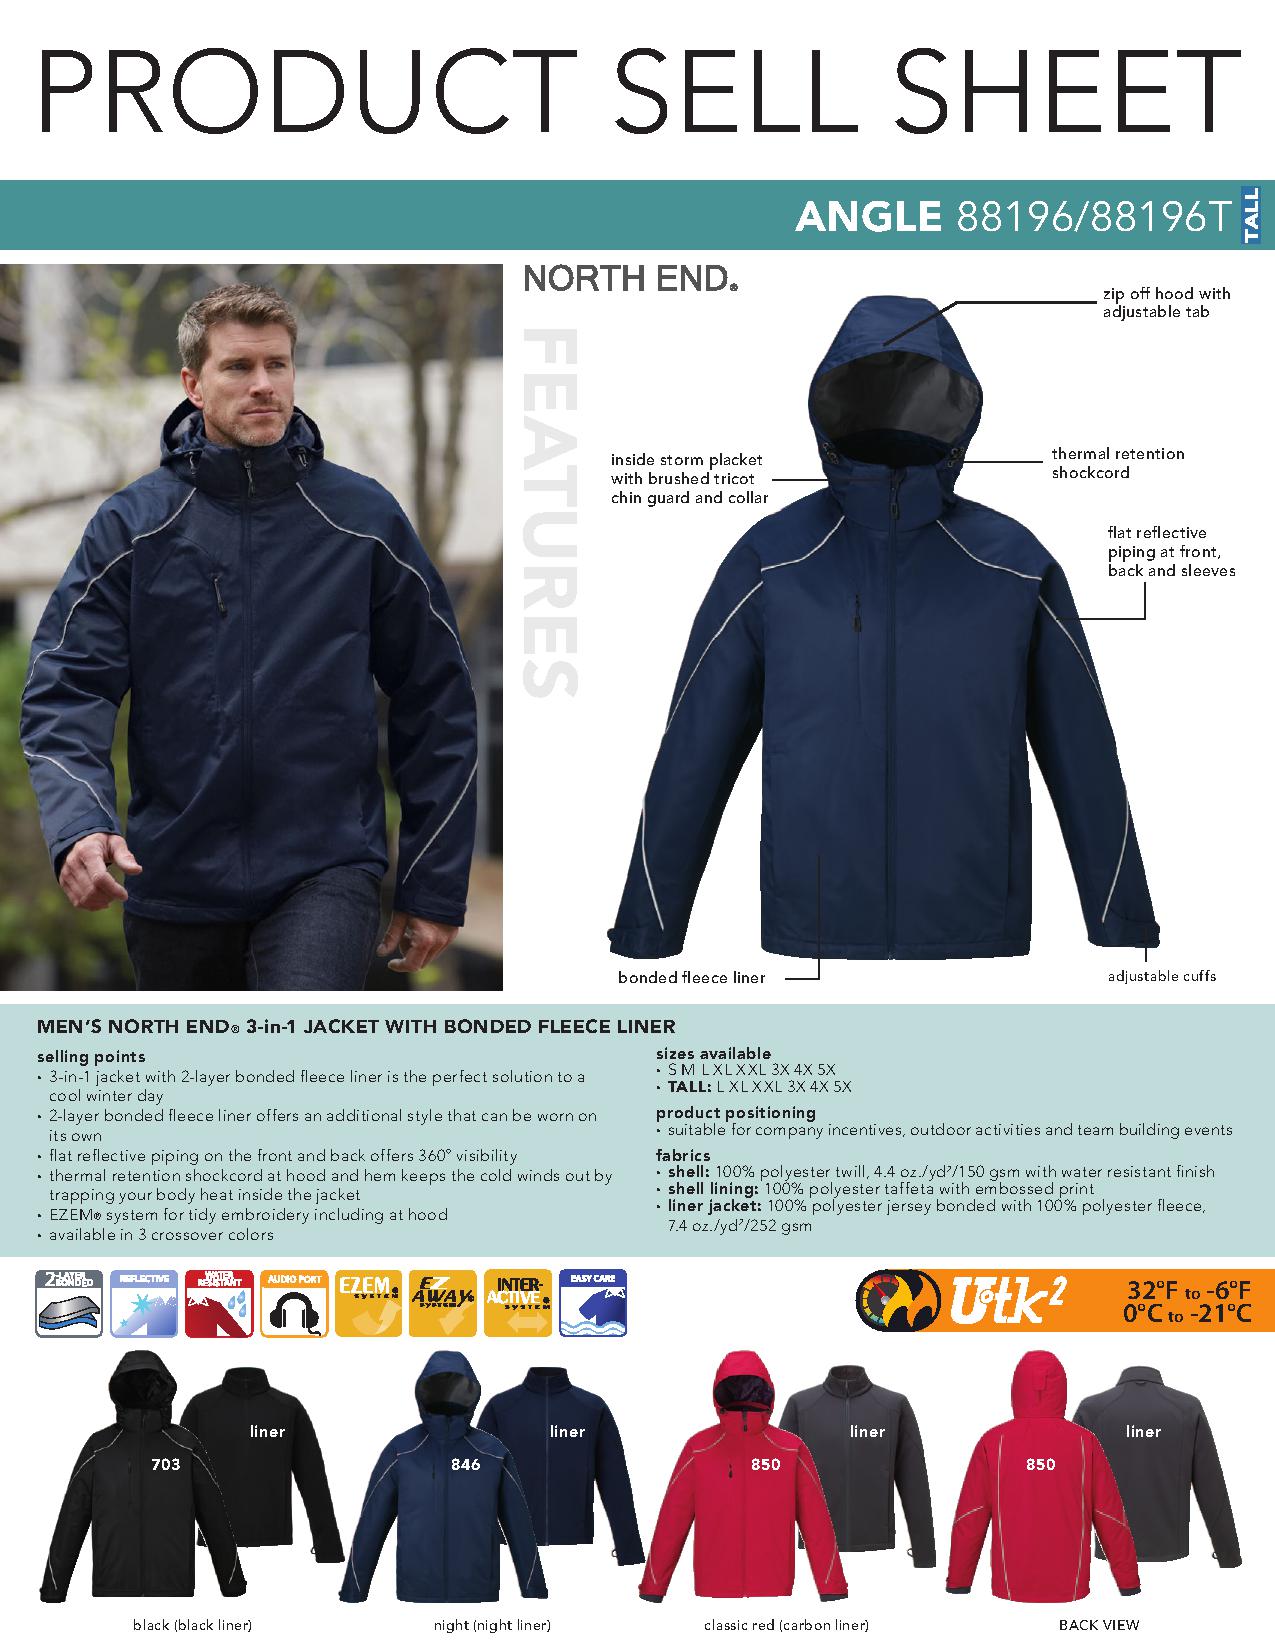 North End 88196 - Men's Angle 3-In-1 Jacket With With Bonded Fleece Liner